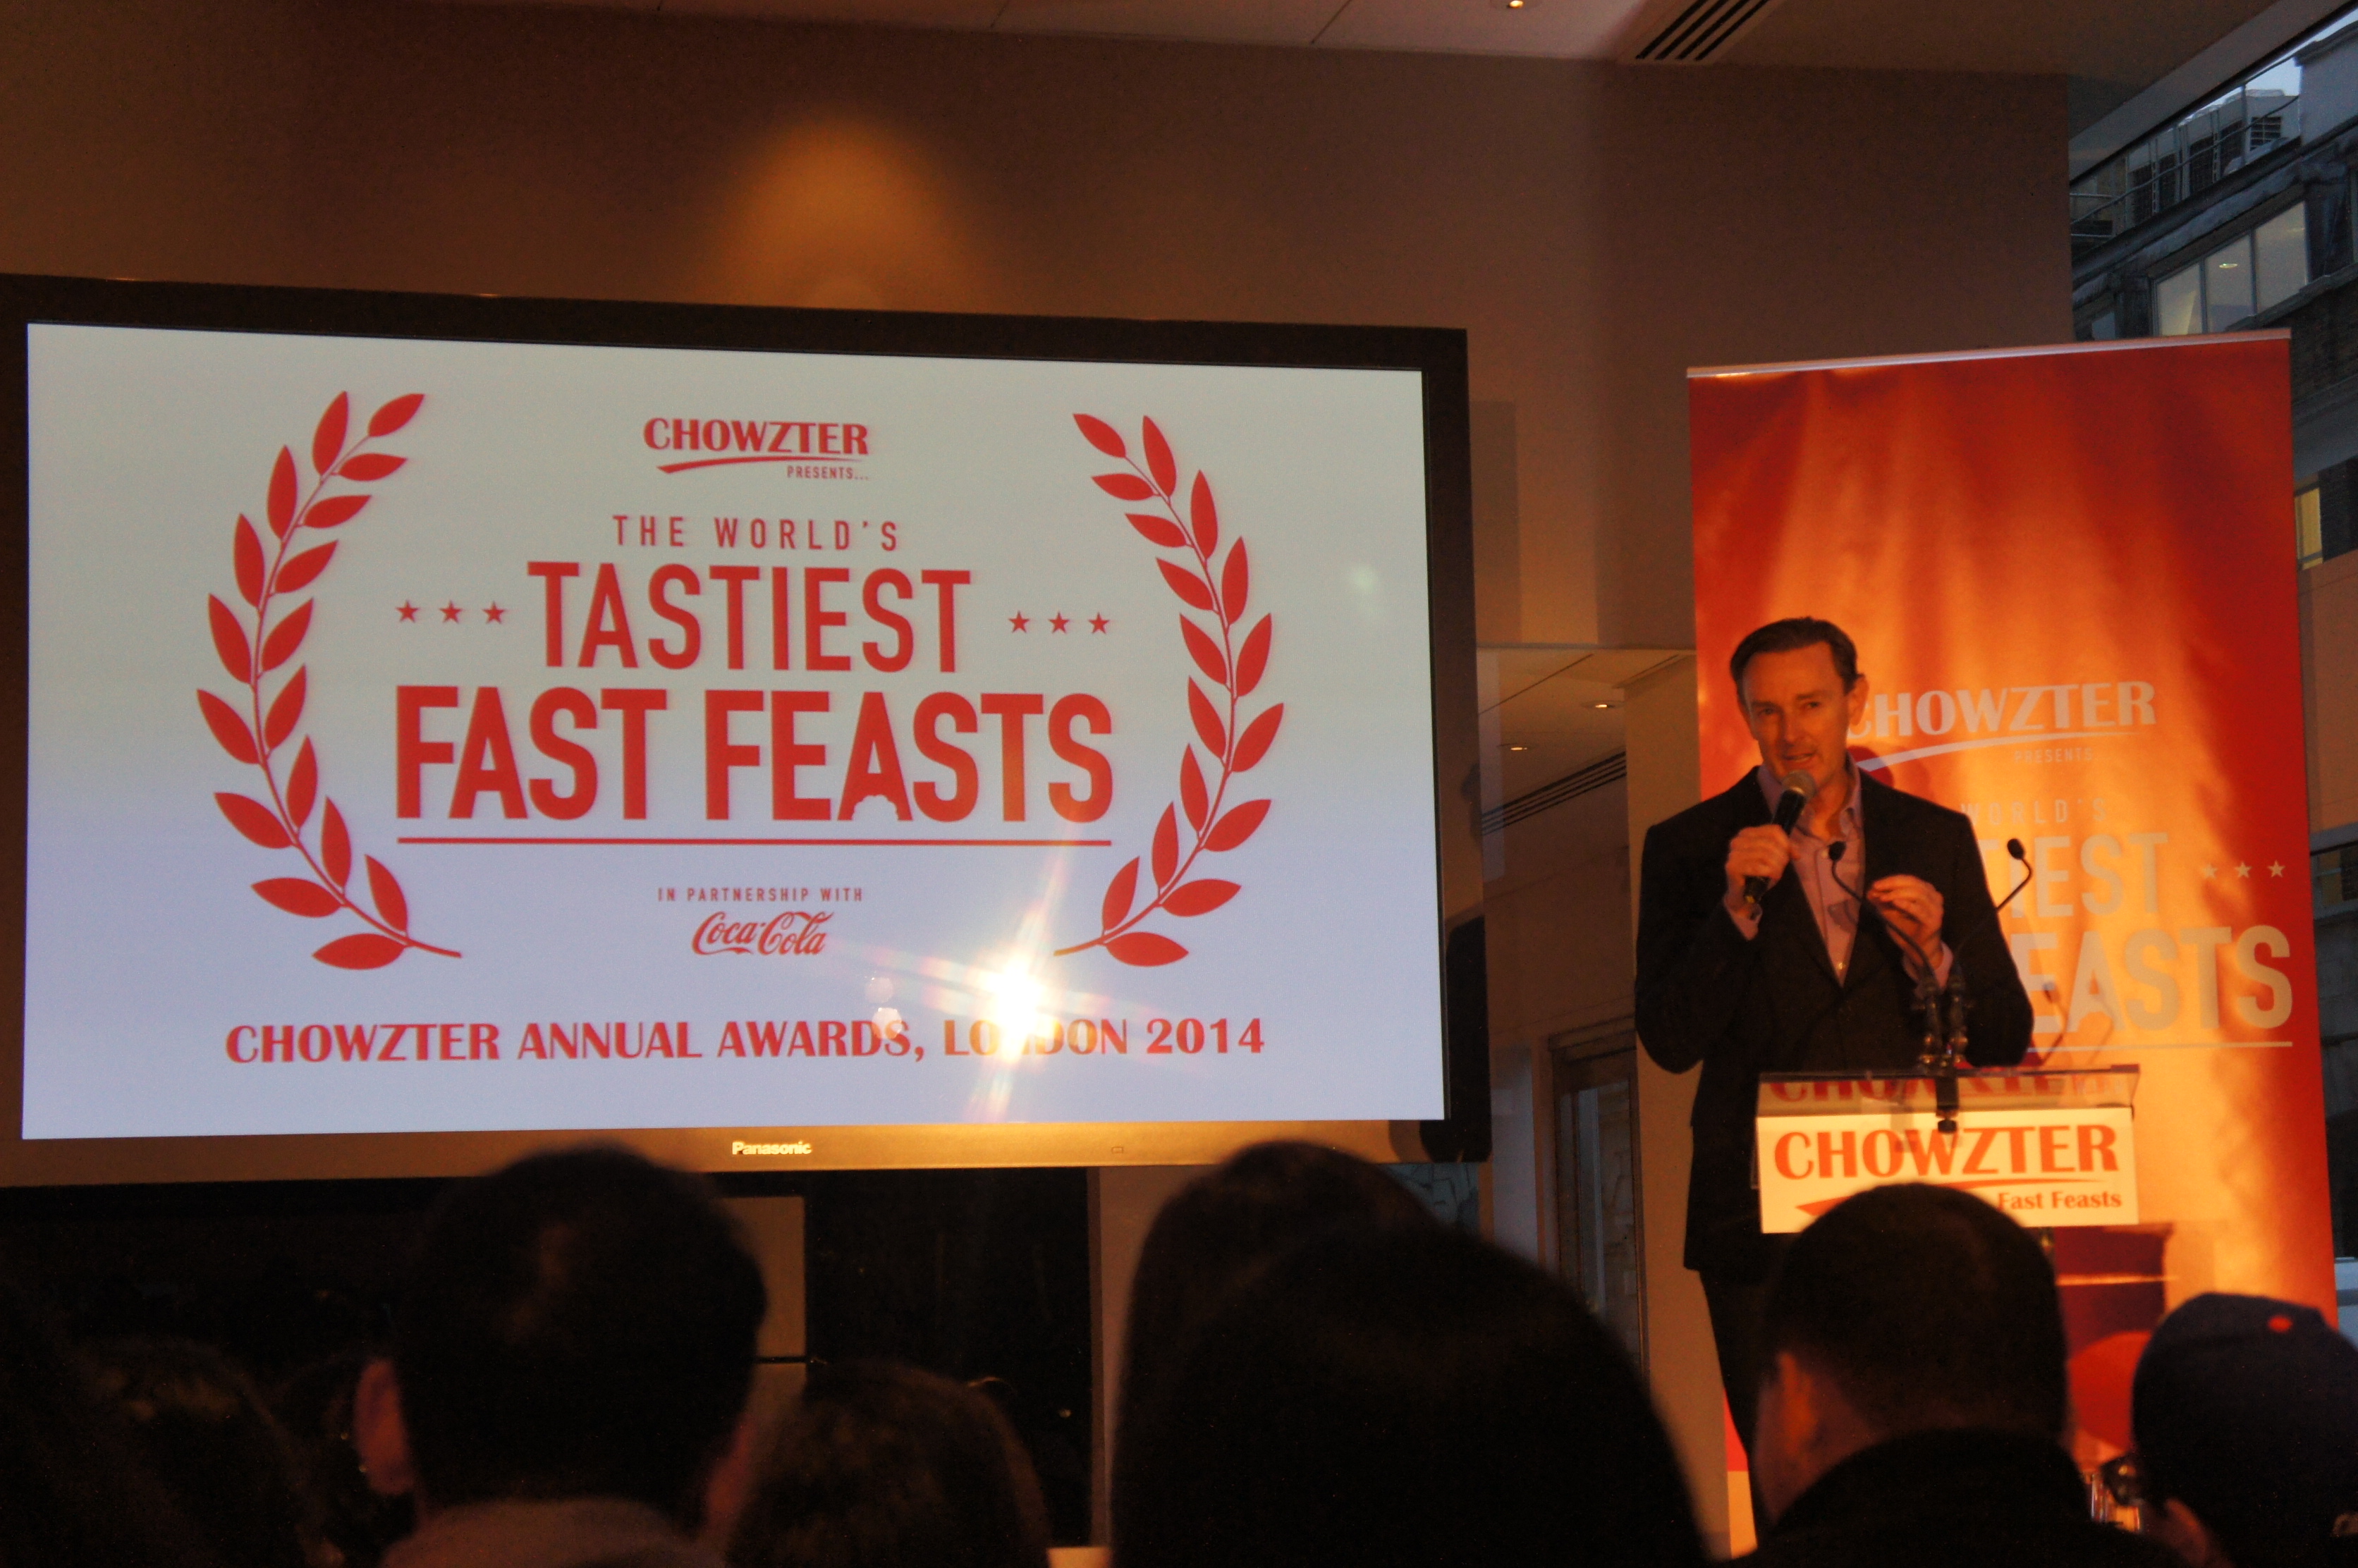 Chowzter’s Global Fast Feast Awards 2014 in London, England